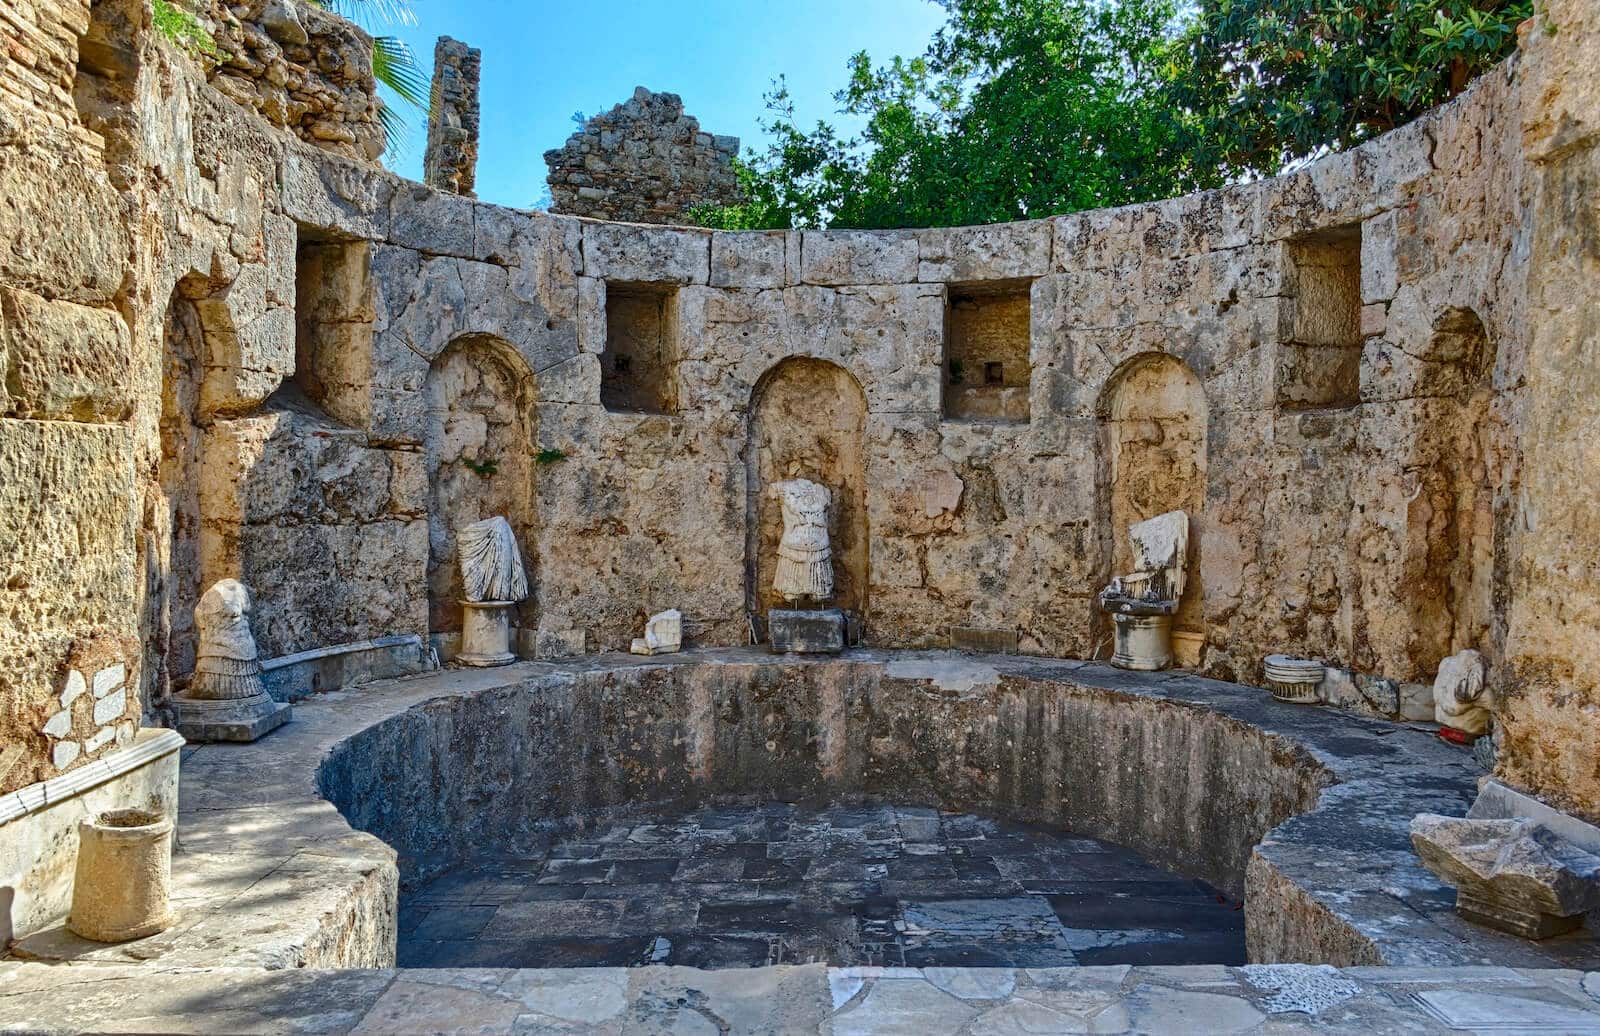 A reconstruction of statues on display around the frigidarium pool at the Agora Baths in Side, Turkey. Photograph by and courtesy of Laszlo Szirtesi.